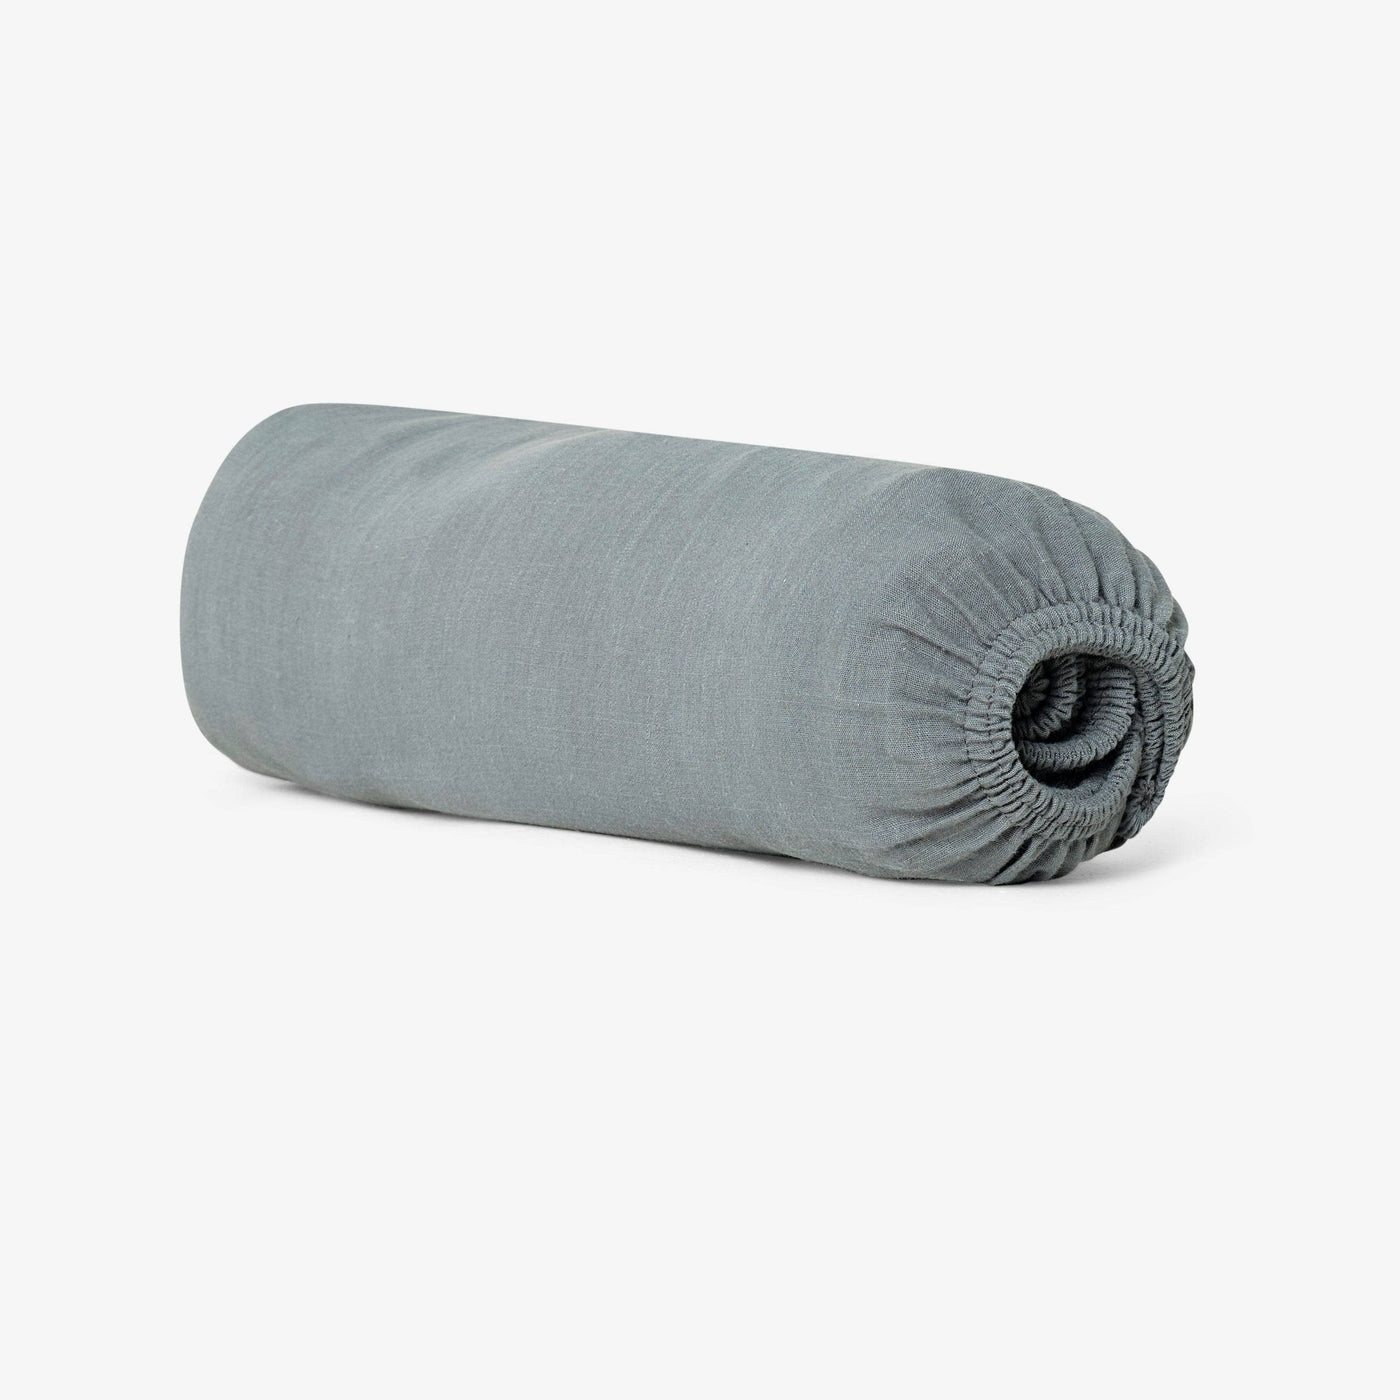 Ruby 100% Turkish Cotton Fitted Sheet, Anthracite Grey, Super King Size Bed Sheets sazy.com